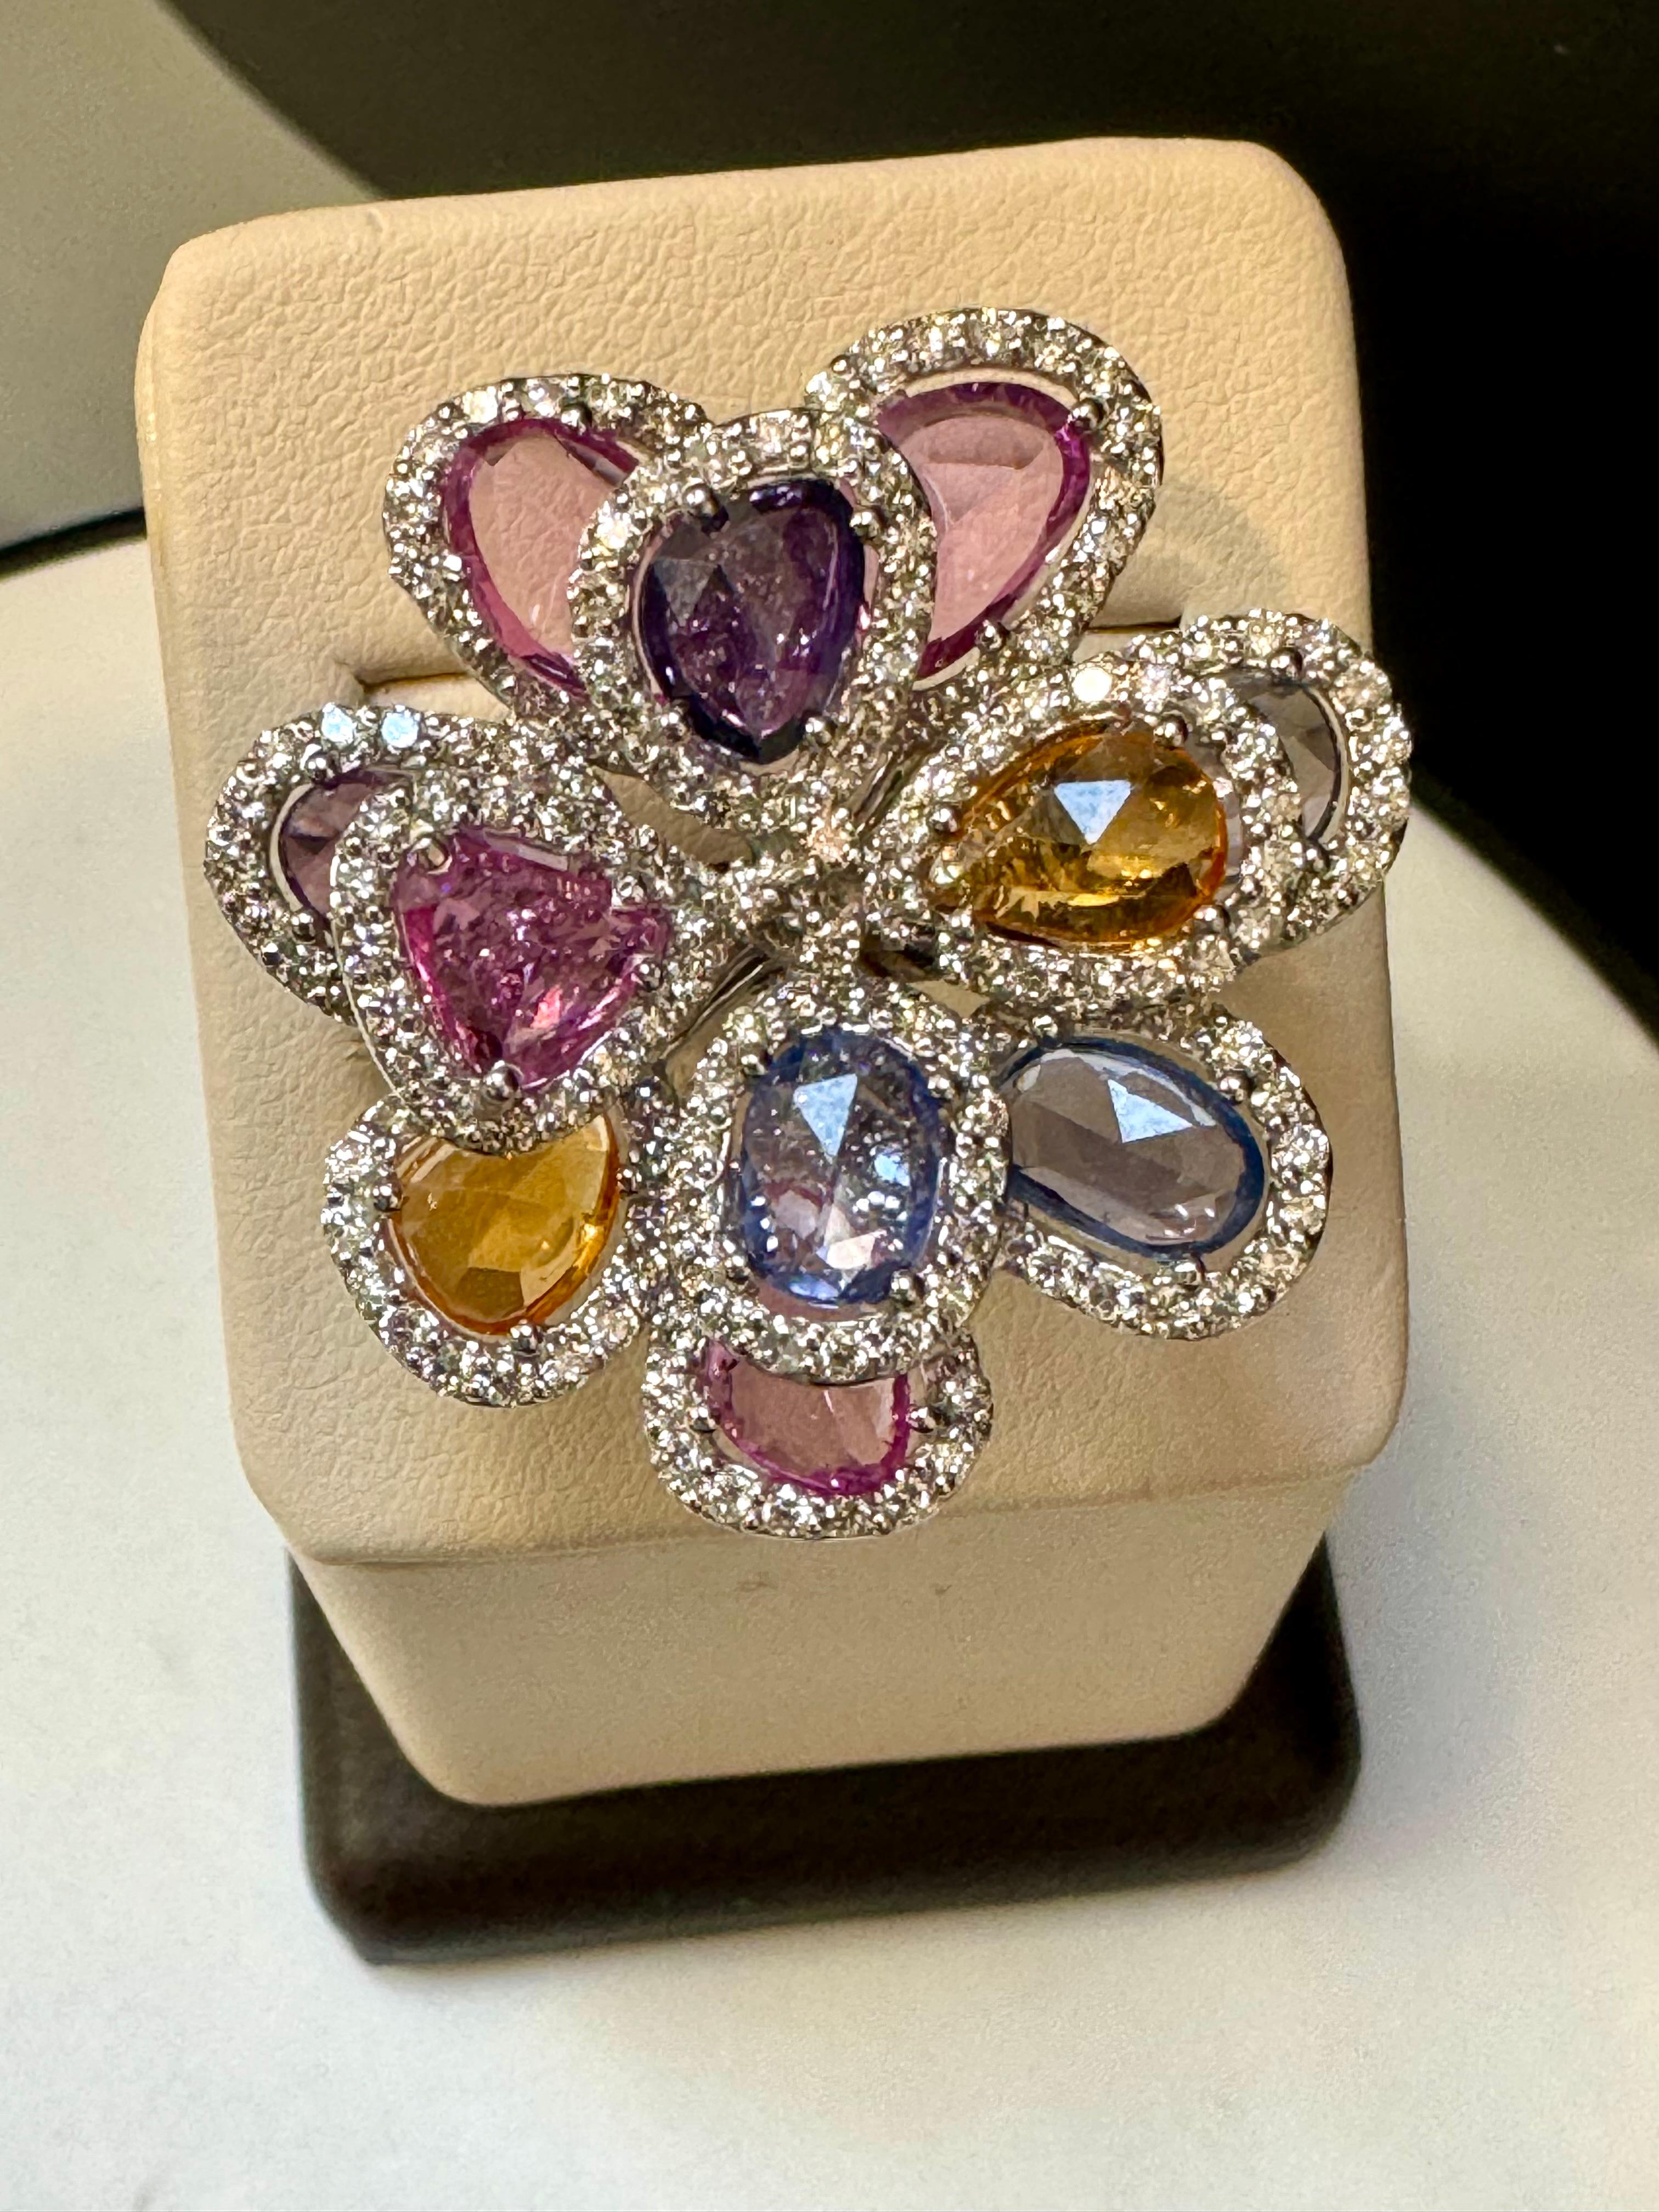 11 Ct Fine Multi Sapphire & 3 Ct Diamond Cocktail Flower Ring in 18 Kt Gold  6.5 For Sale 6